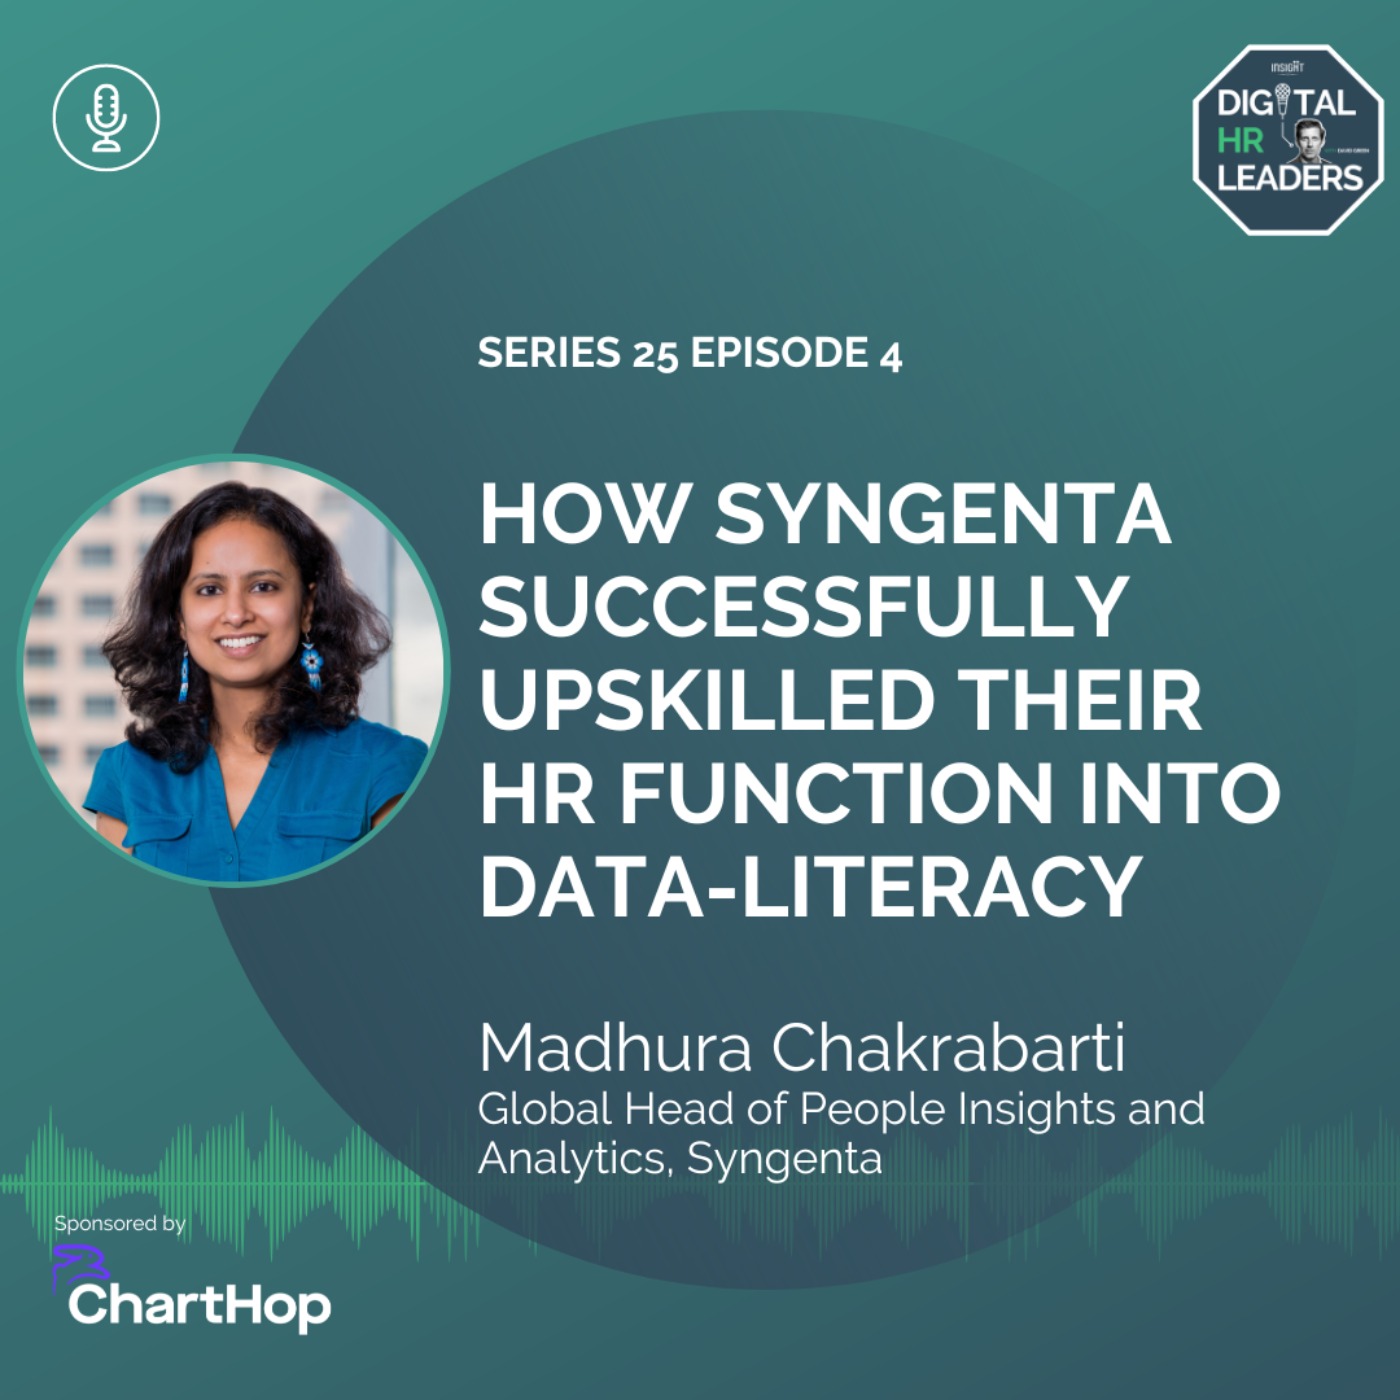 How Syngenta Successfully Upskilled Their HR Function Into Data-Literacy